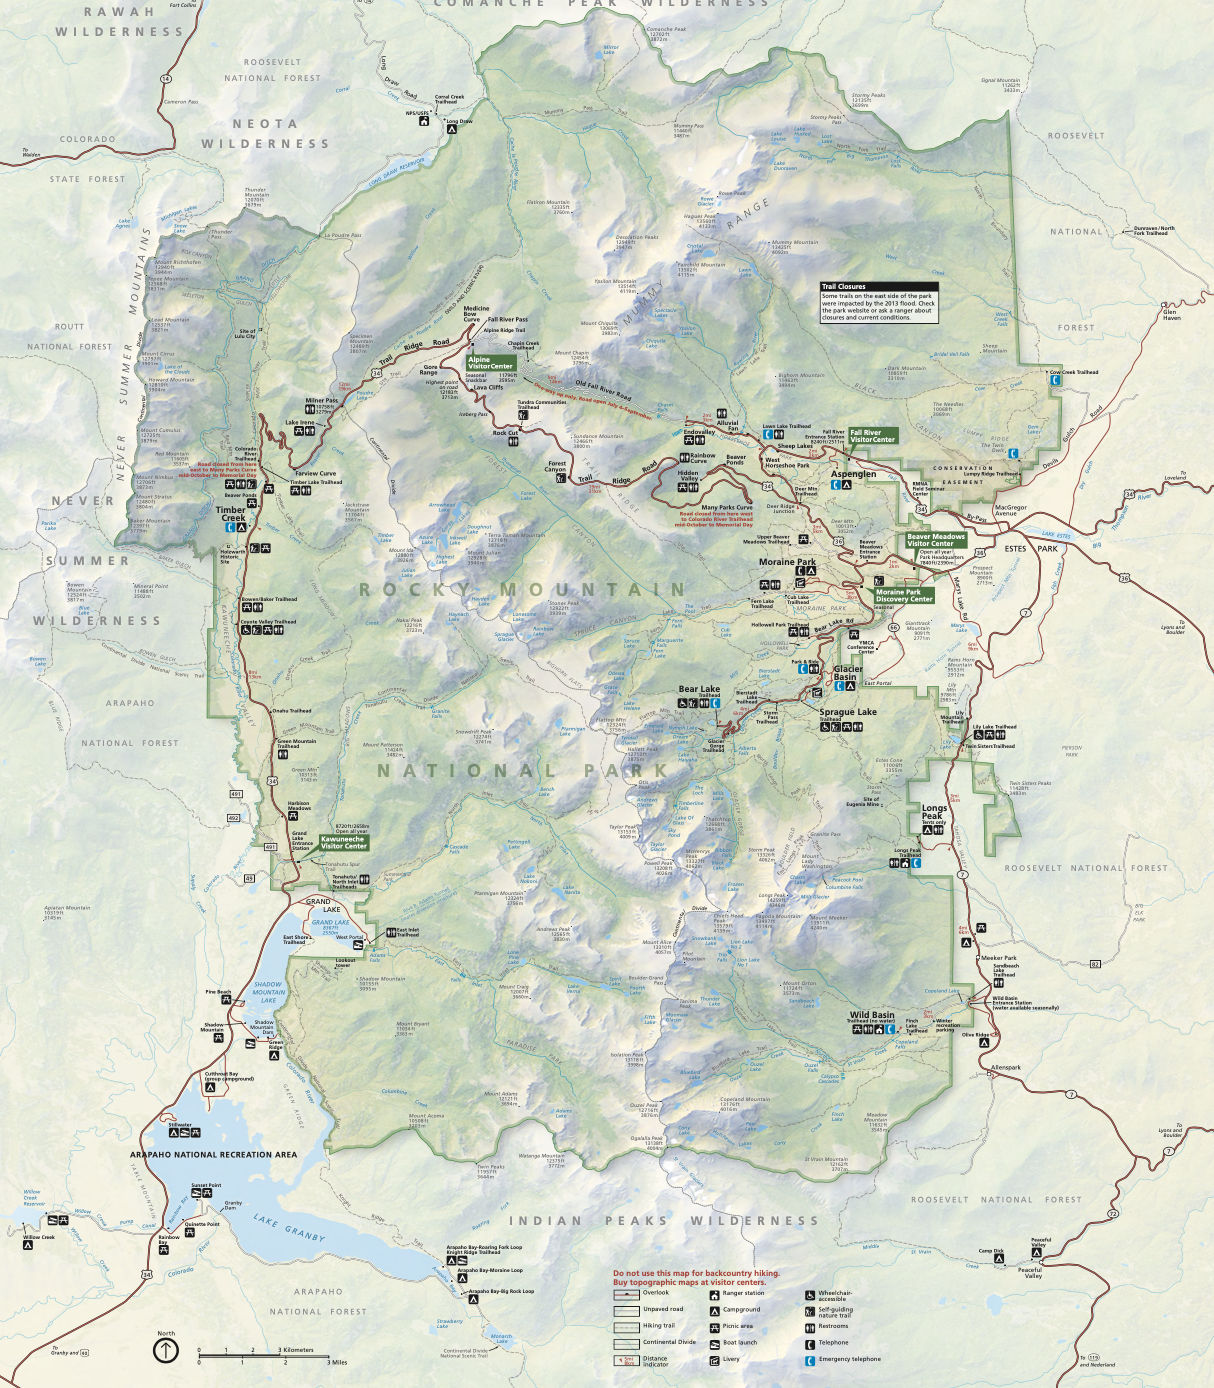 Map of Rocky Mountain National Park roads, lakes, campgrounds and visitor centers